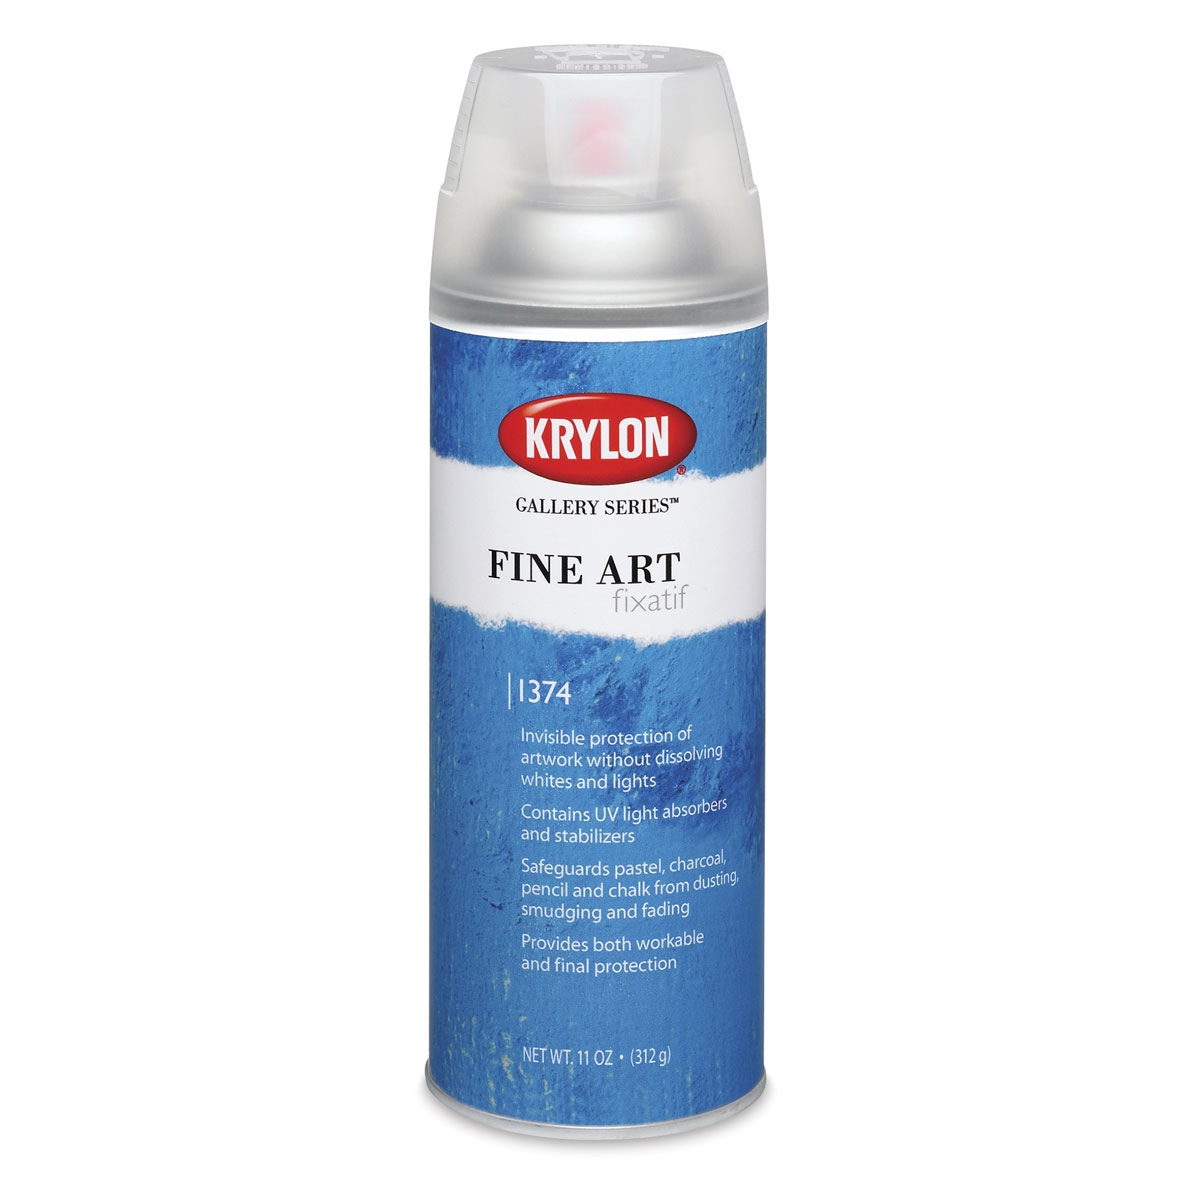 Does fixative spray keep graphite pencil drawing from erasing? : r